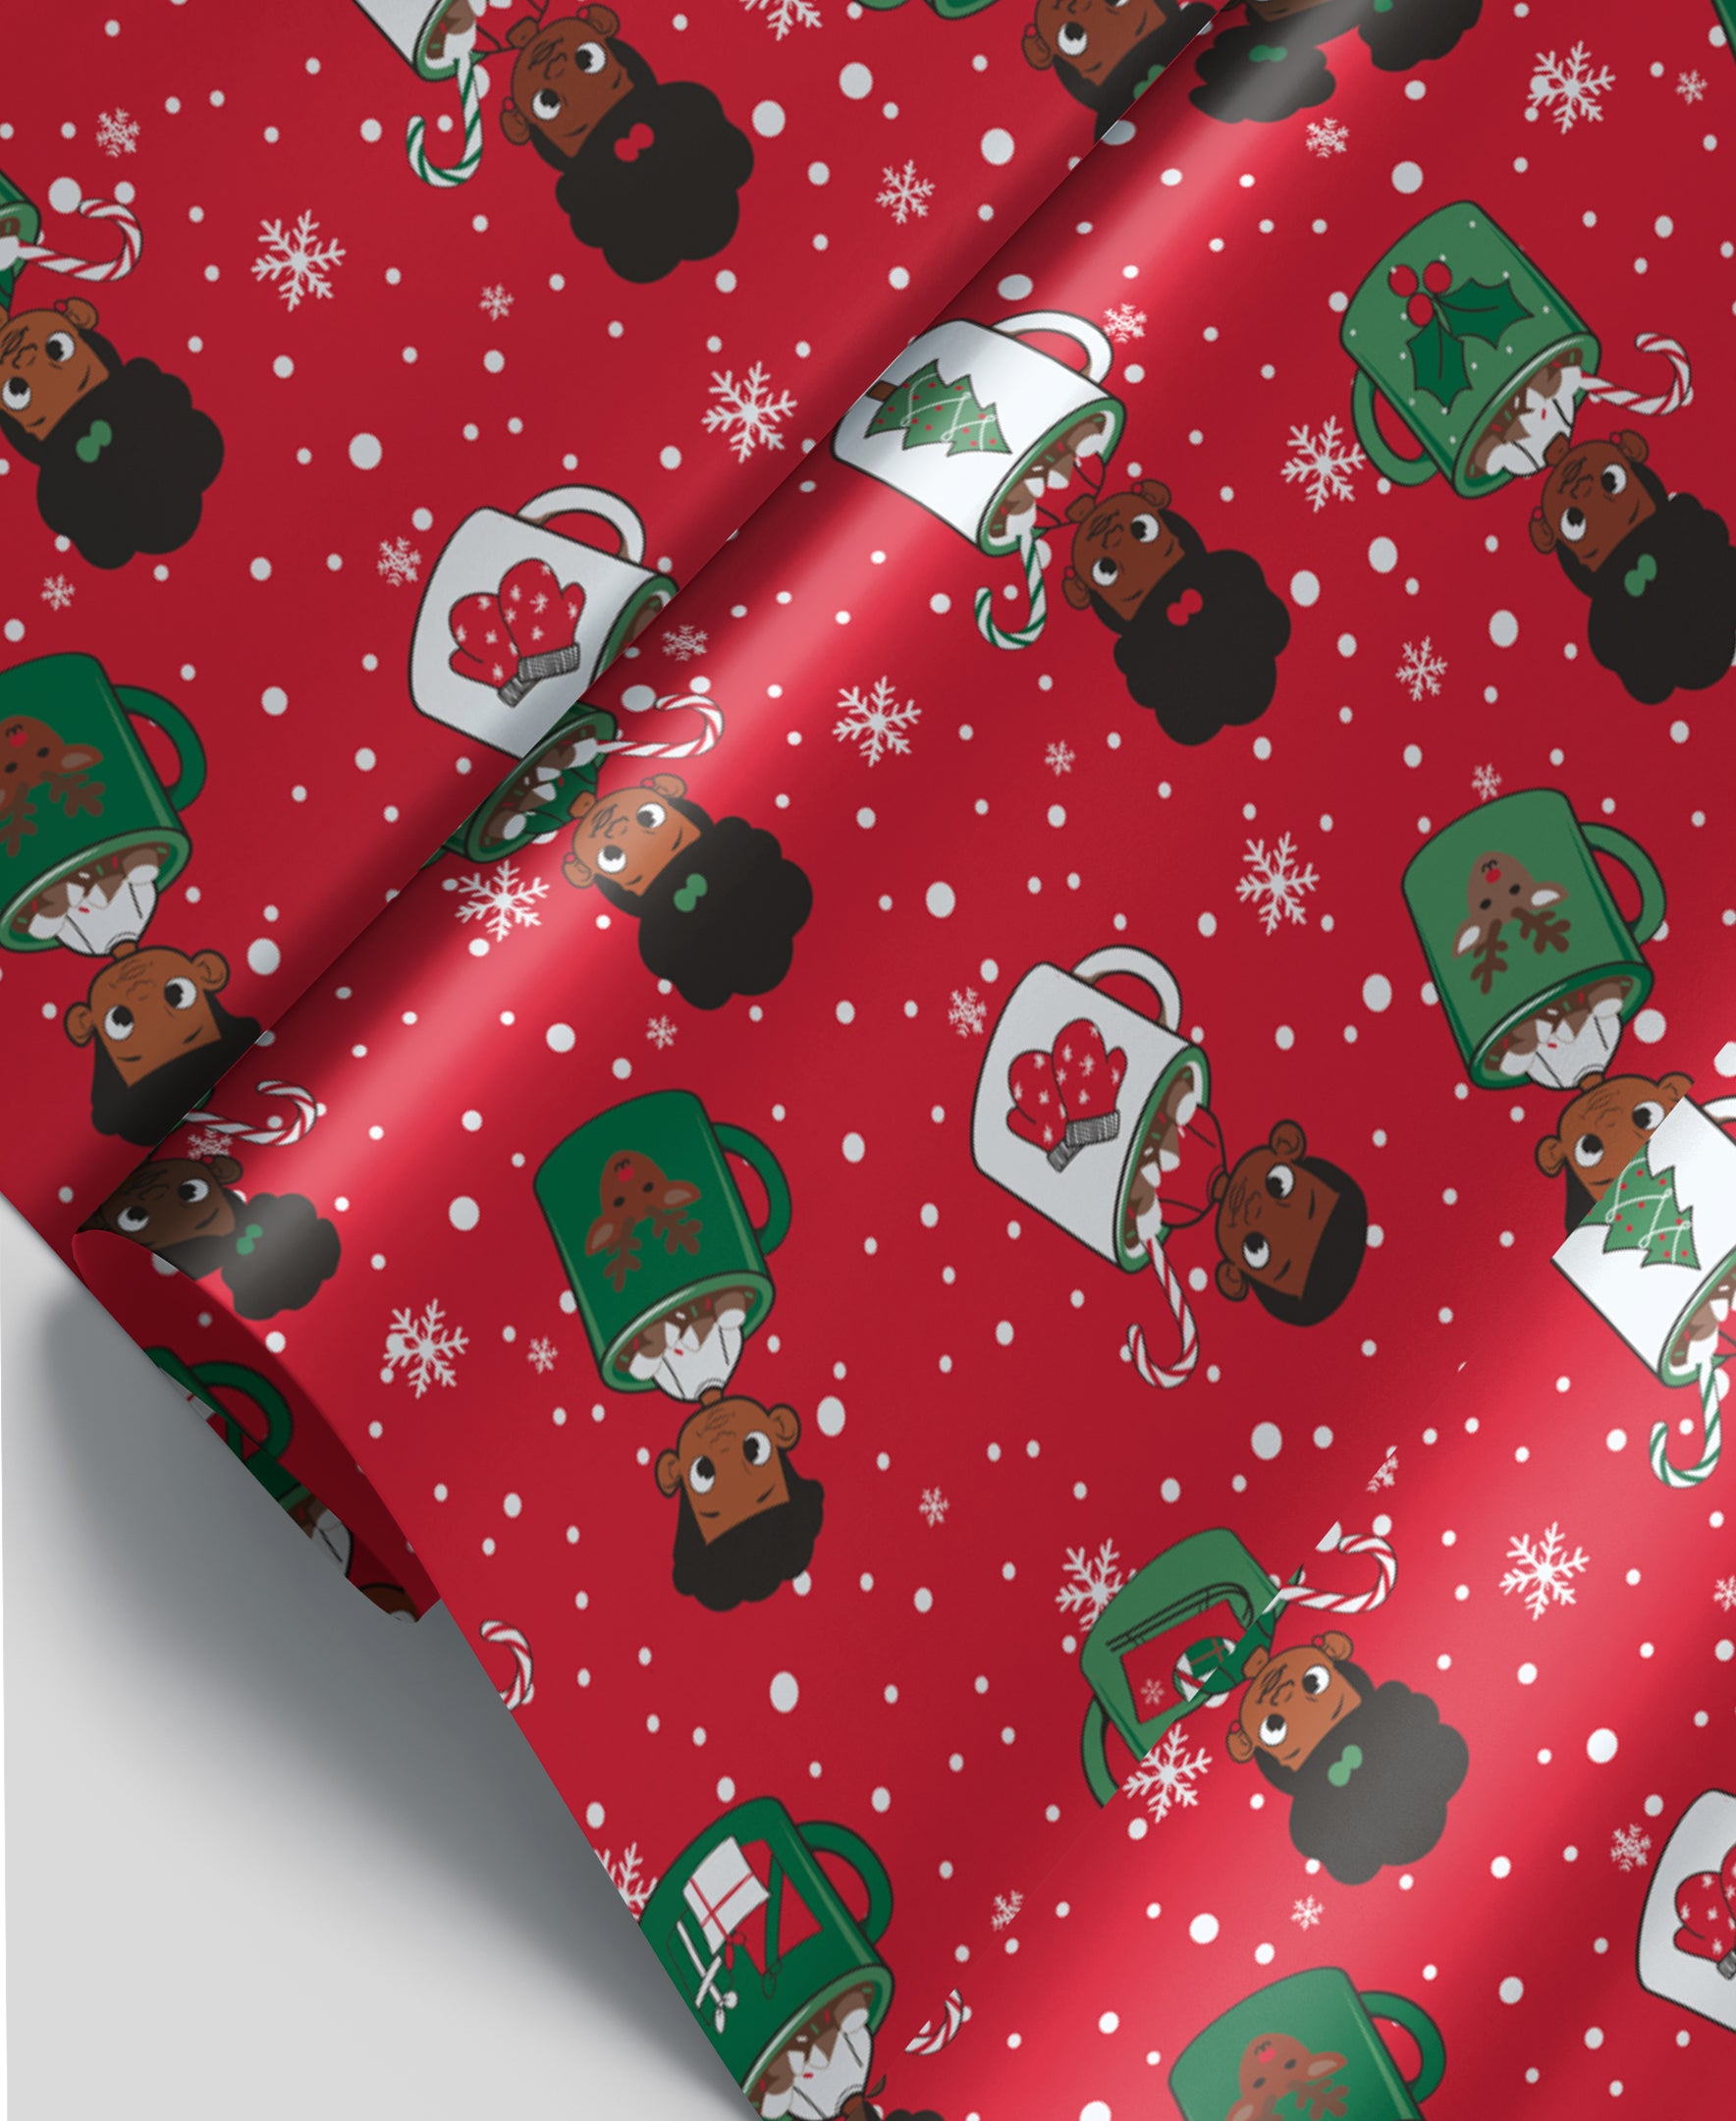 Folk Holiday (BLACK) 12x18 premium wrapping paper sheets